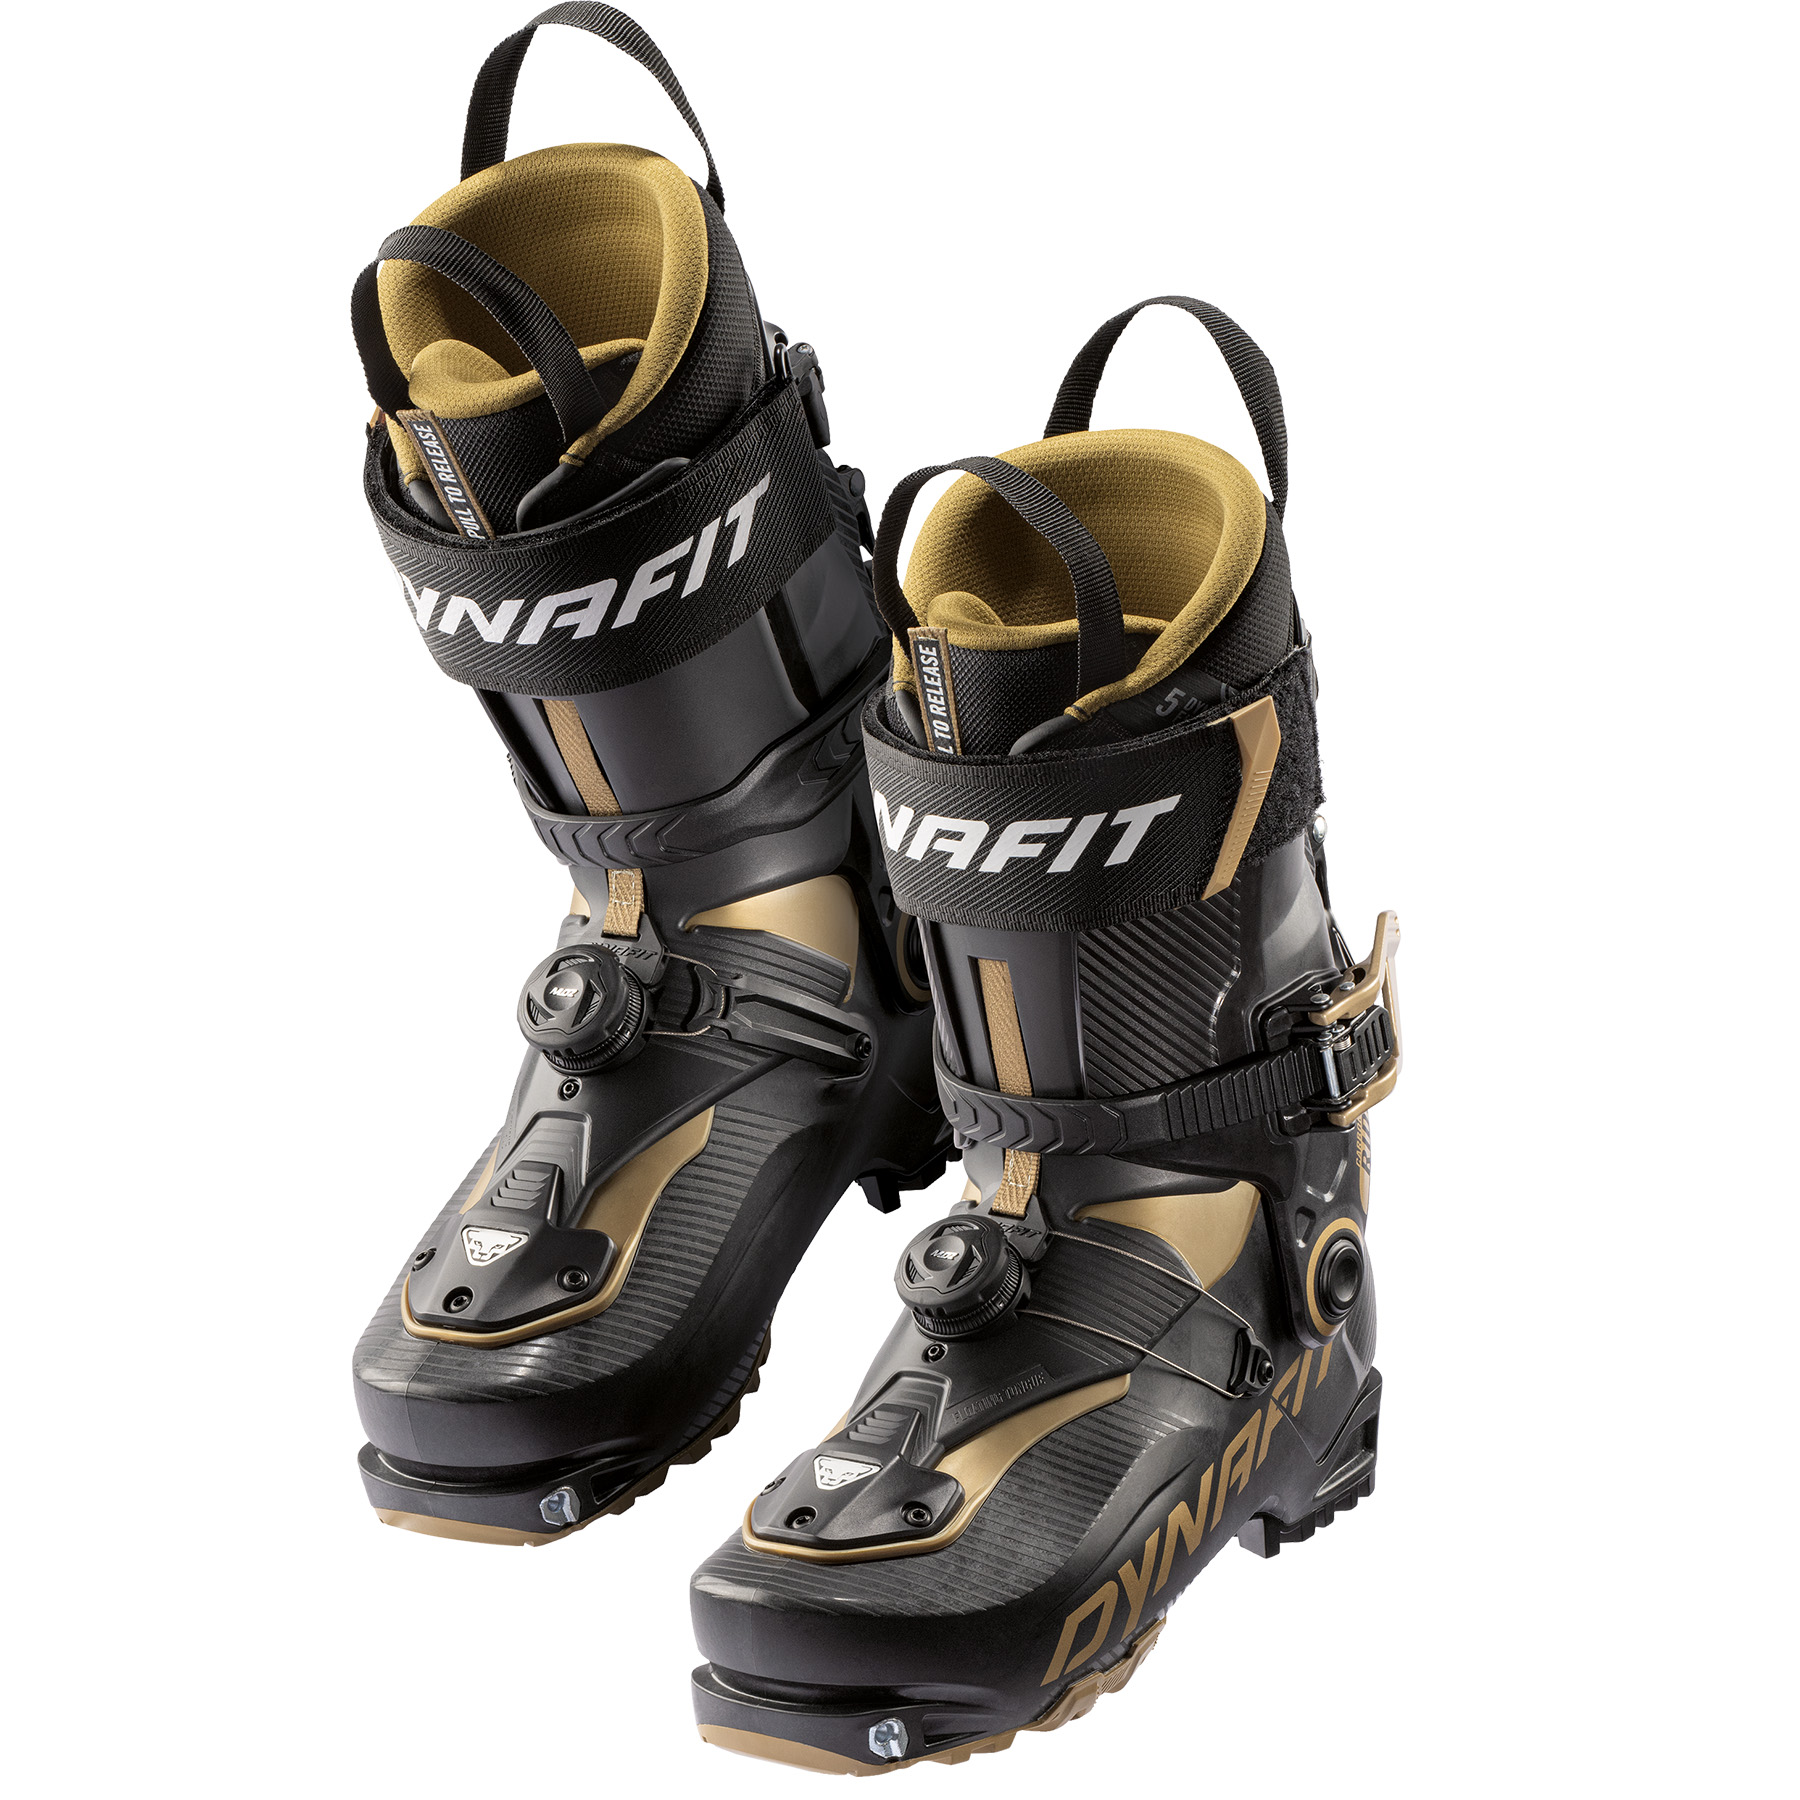 Dynafit & Hoji announce new Dynafit Ridge and Ridge Pro ski boots; BLISTER discusses the details of the boots